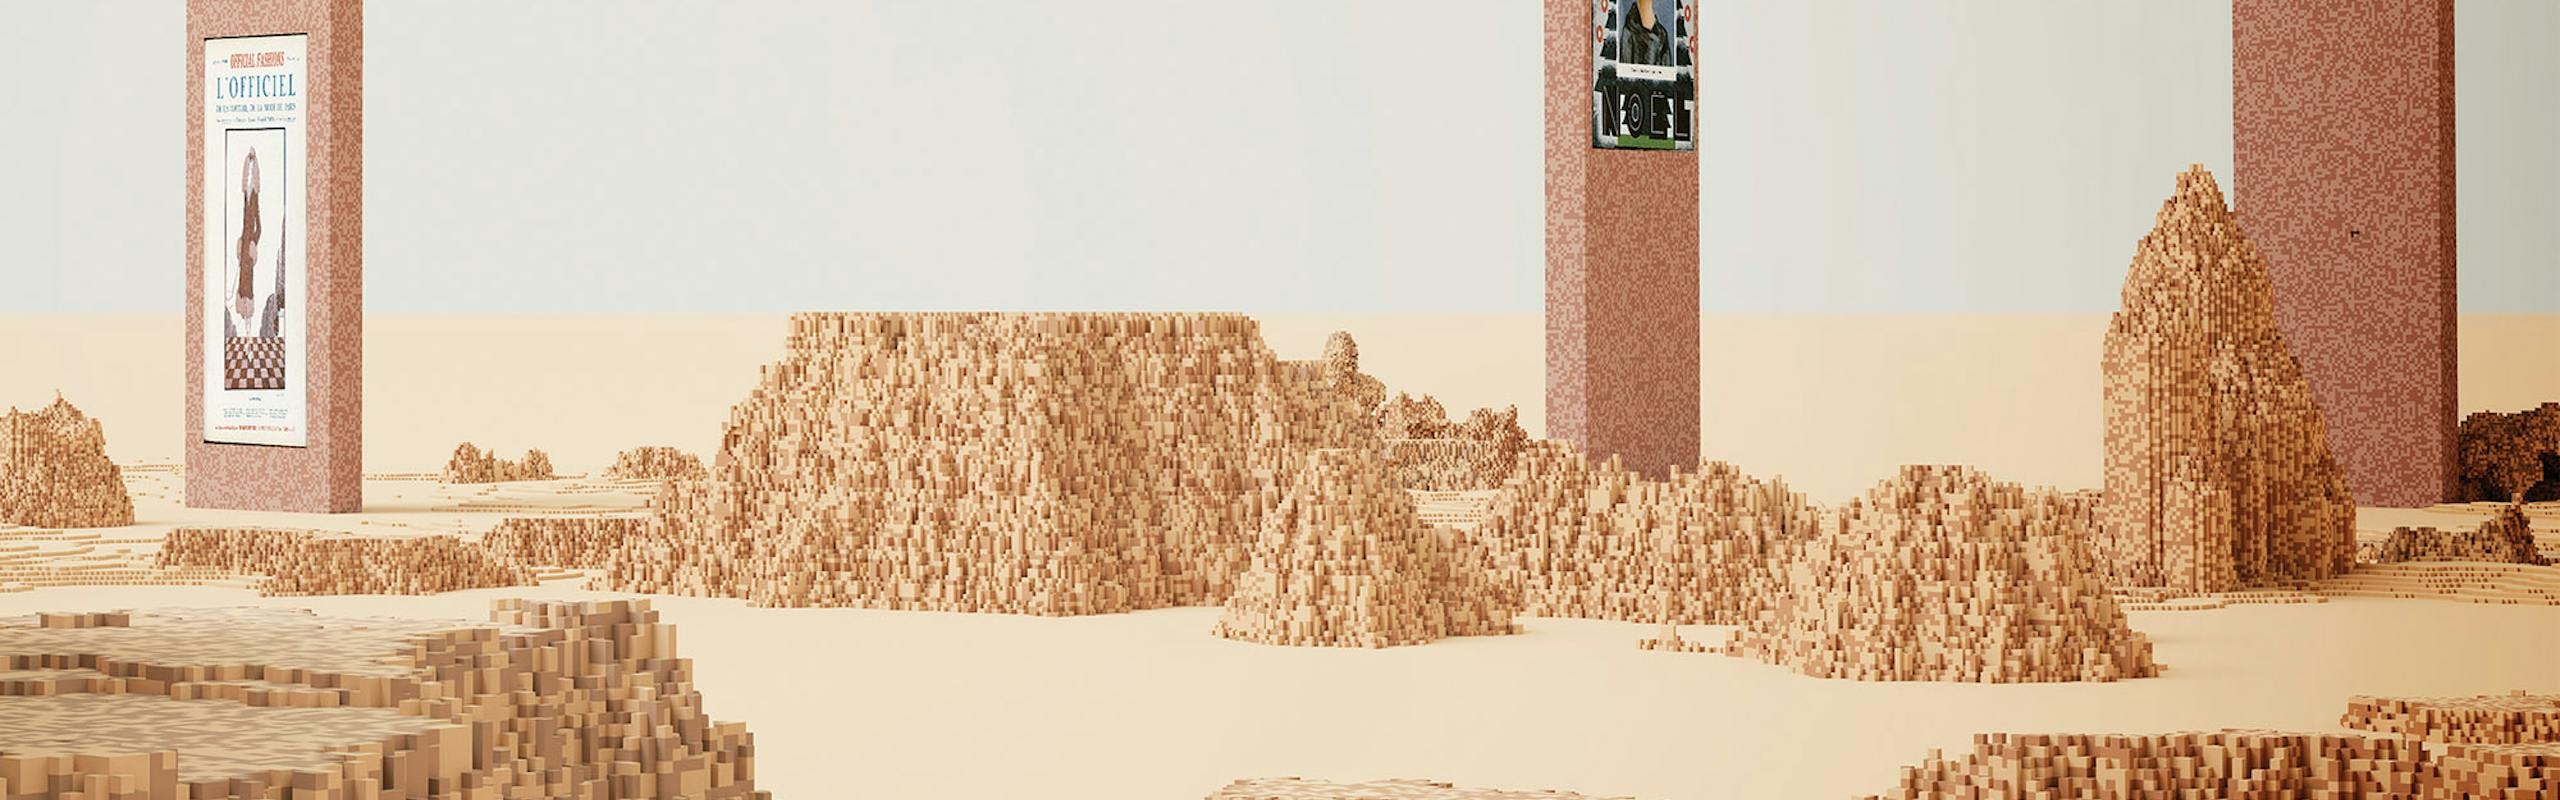 L'OFFICIEL Land inspired by the deserts of Dune and Total Recall.